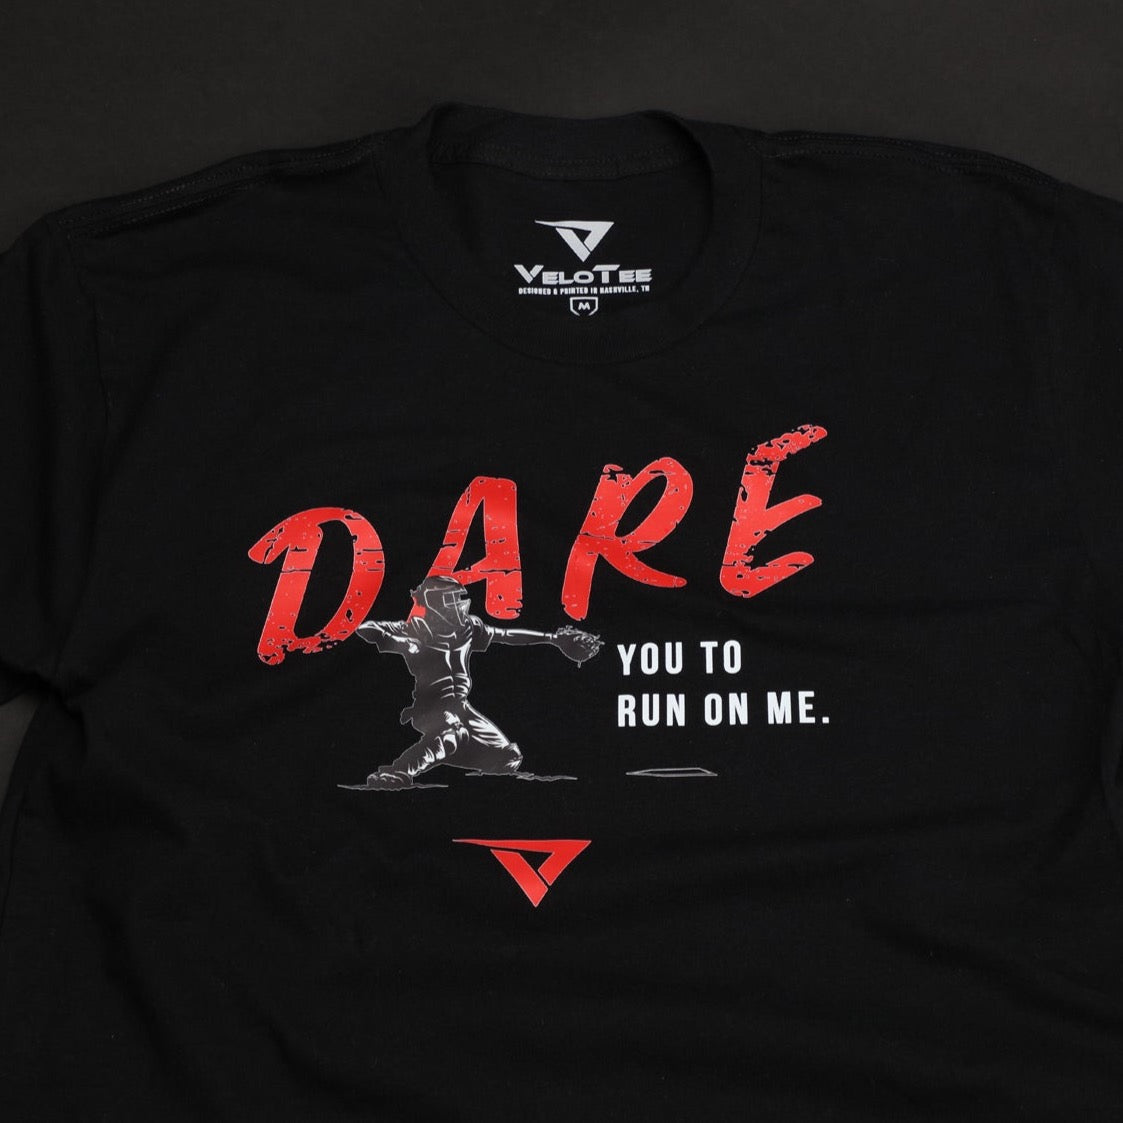 DARE You To Run On Me - VeloTee Catchers T-Shirt